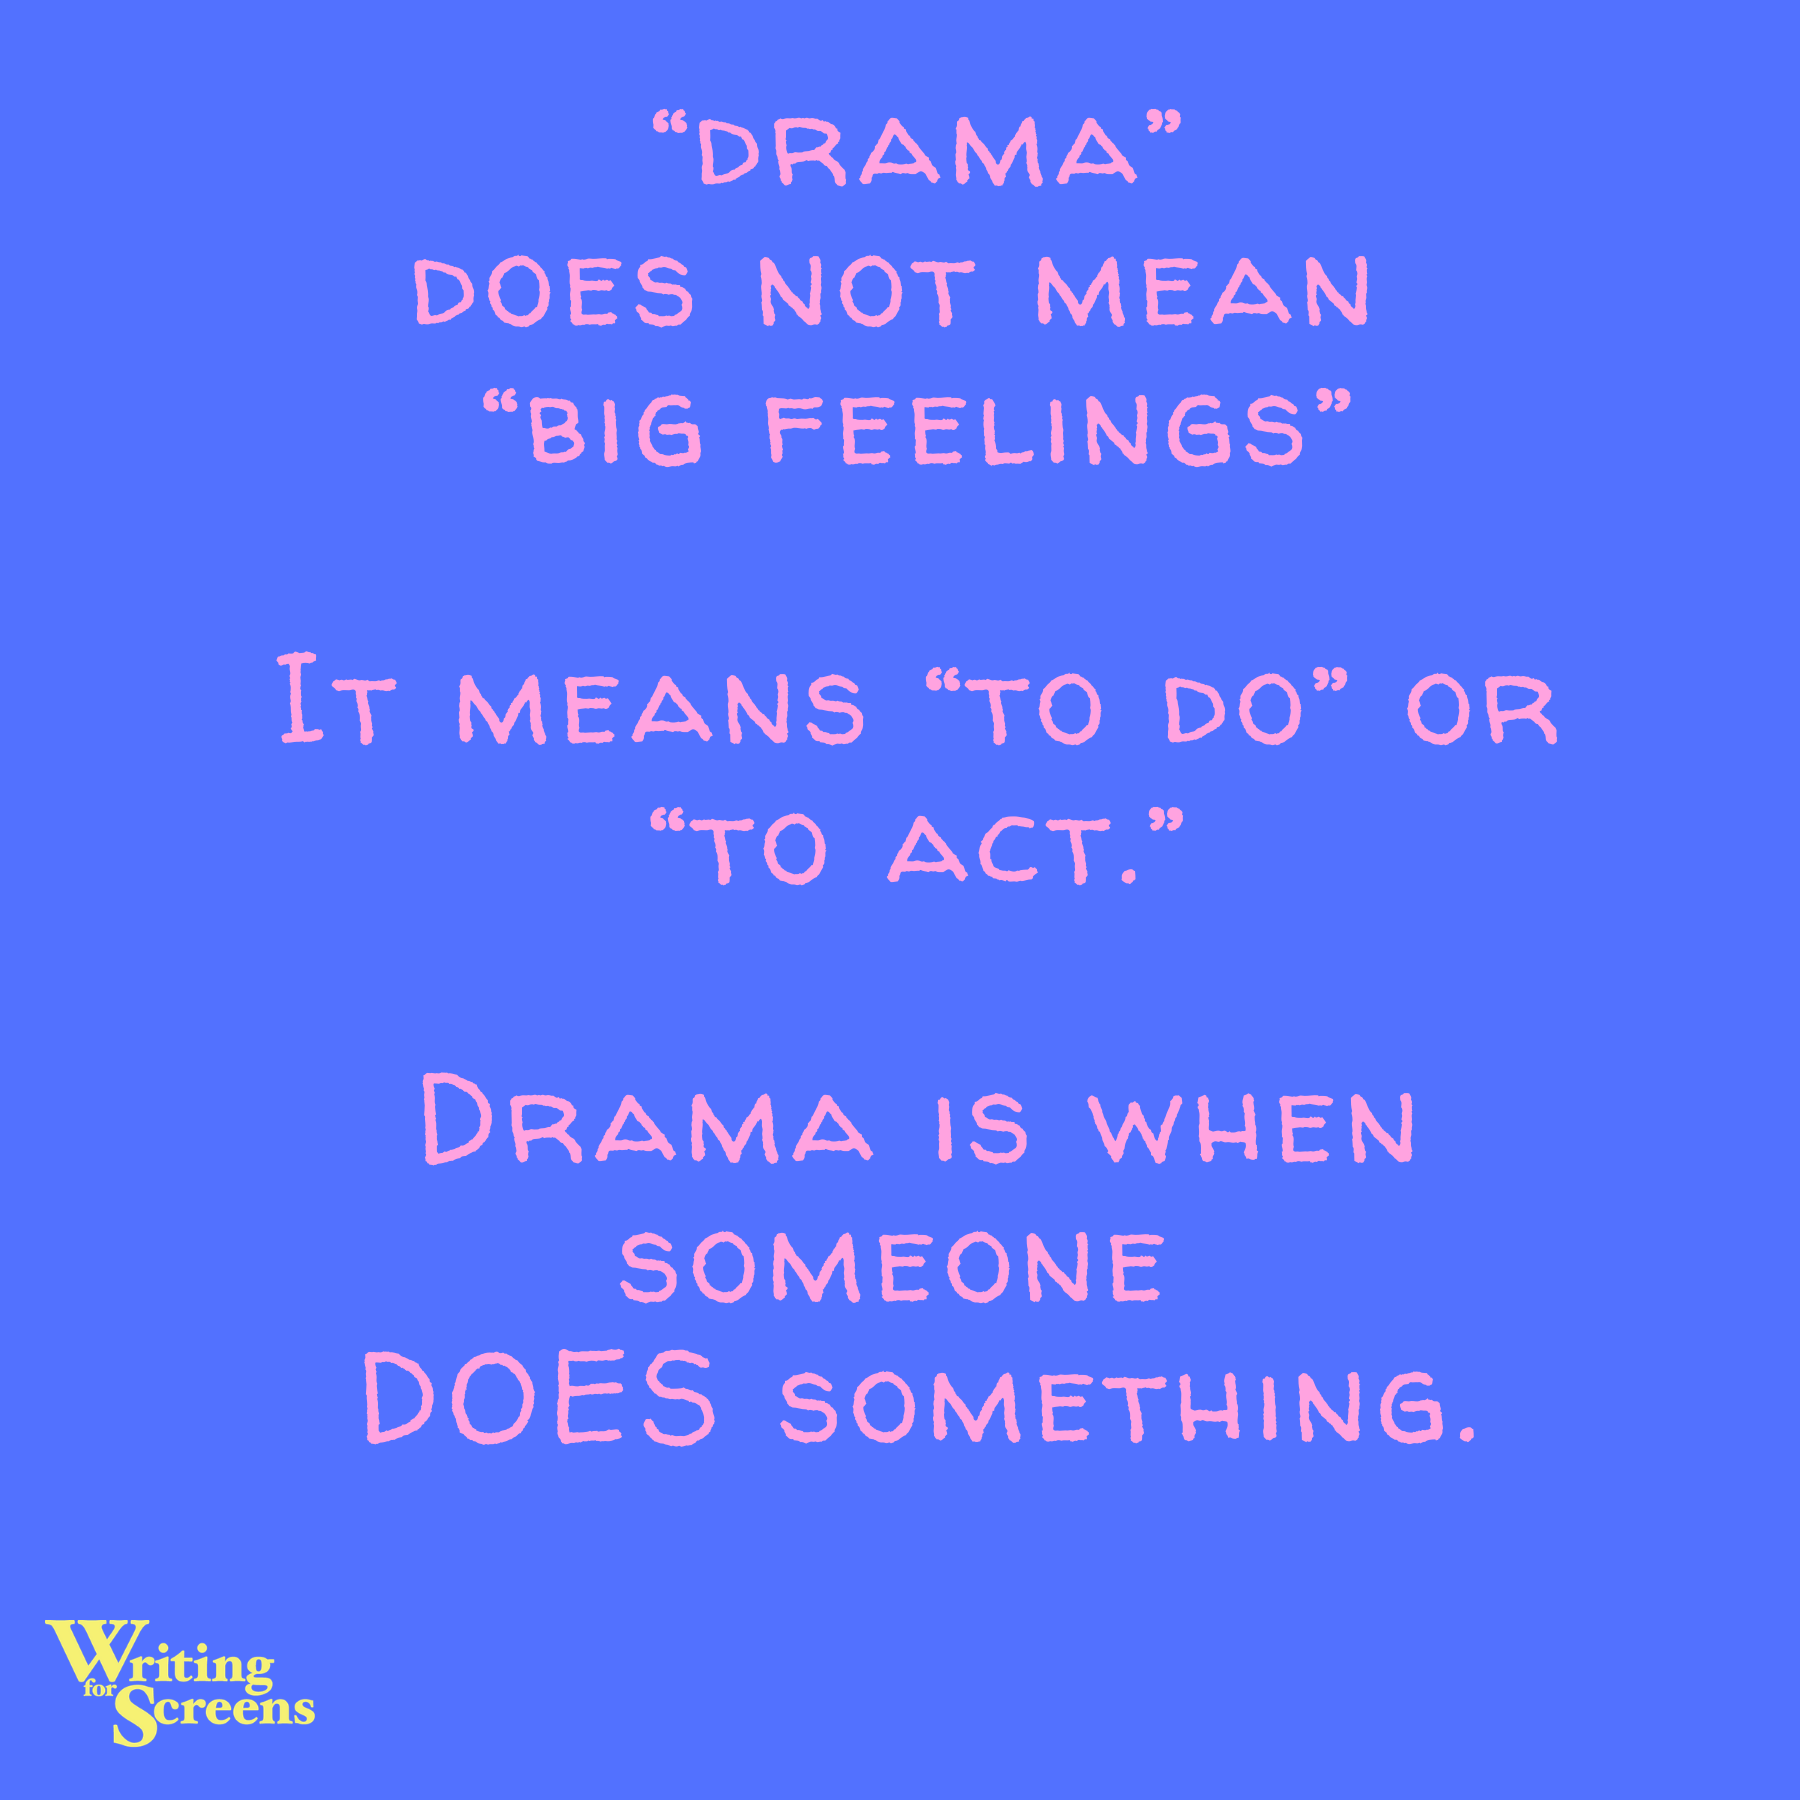 Drama Is Your Friend!